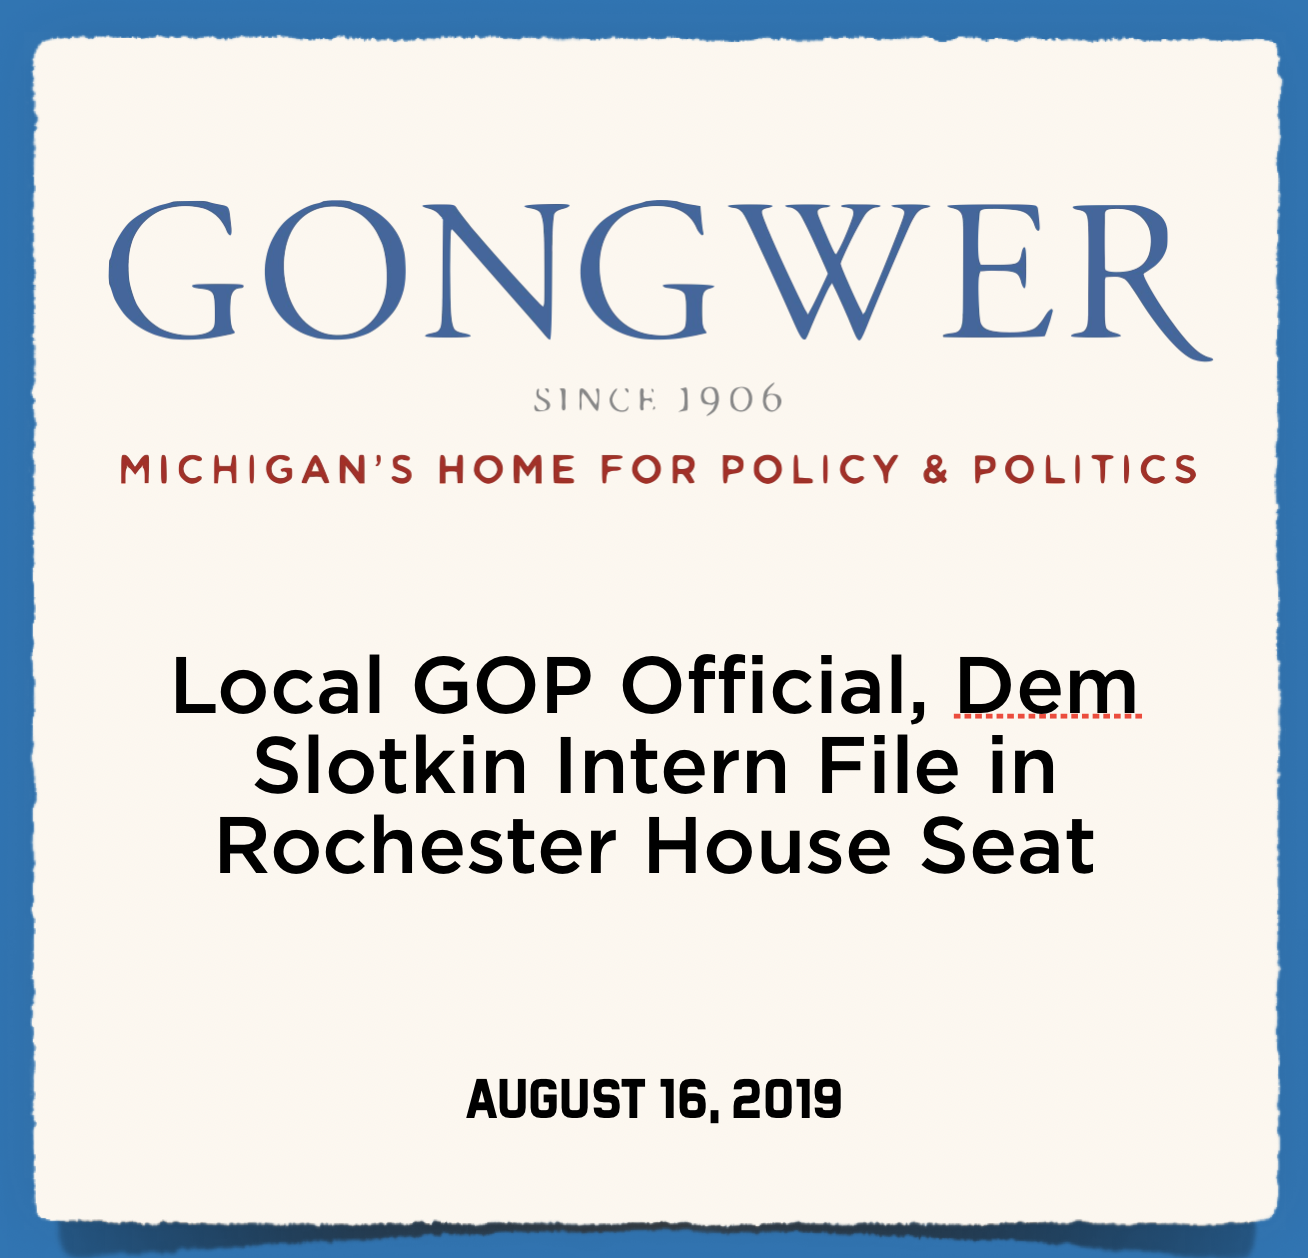 Gongwer: Local GOP Official, Dem Slotkin Intern File in Rochester House Seat